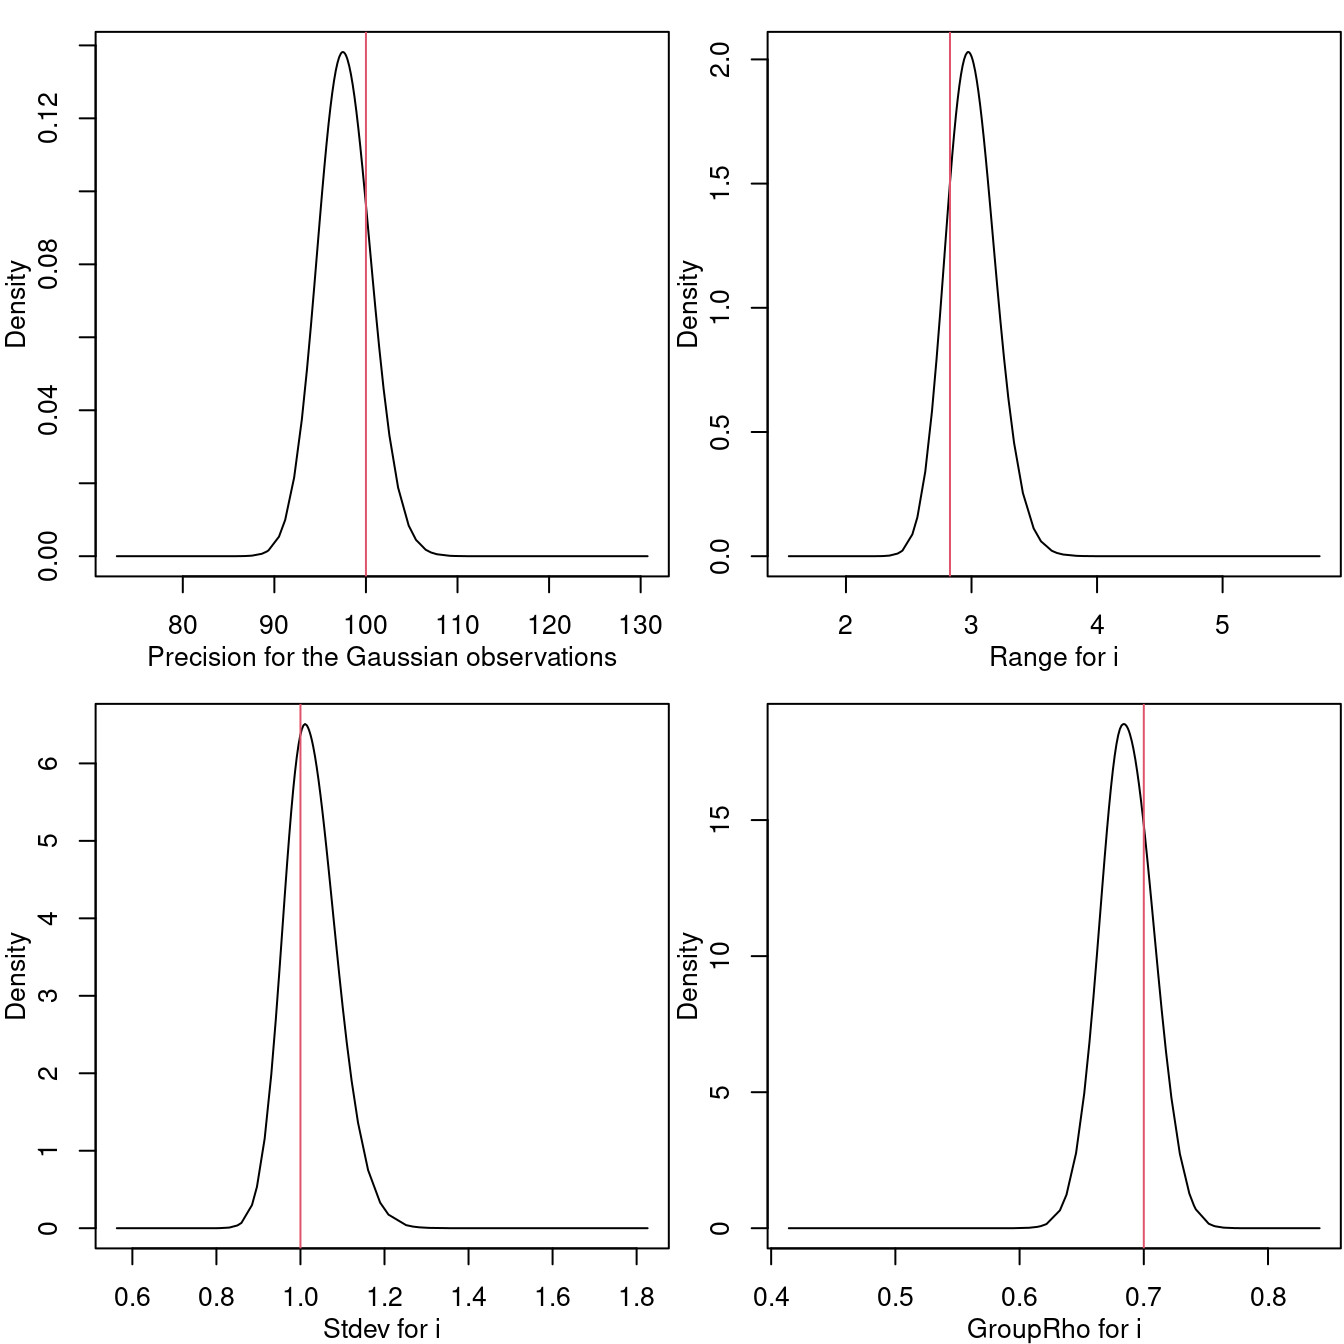 Marginal posterior distribution for the precision of the Gaussian likelihood (top-left), the practical range (top-right), standard deviation of the field (bottom-left) and the temporal correlation (bottom-right). The red vertical lines are placed at the true values of the parameters.